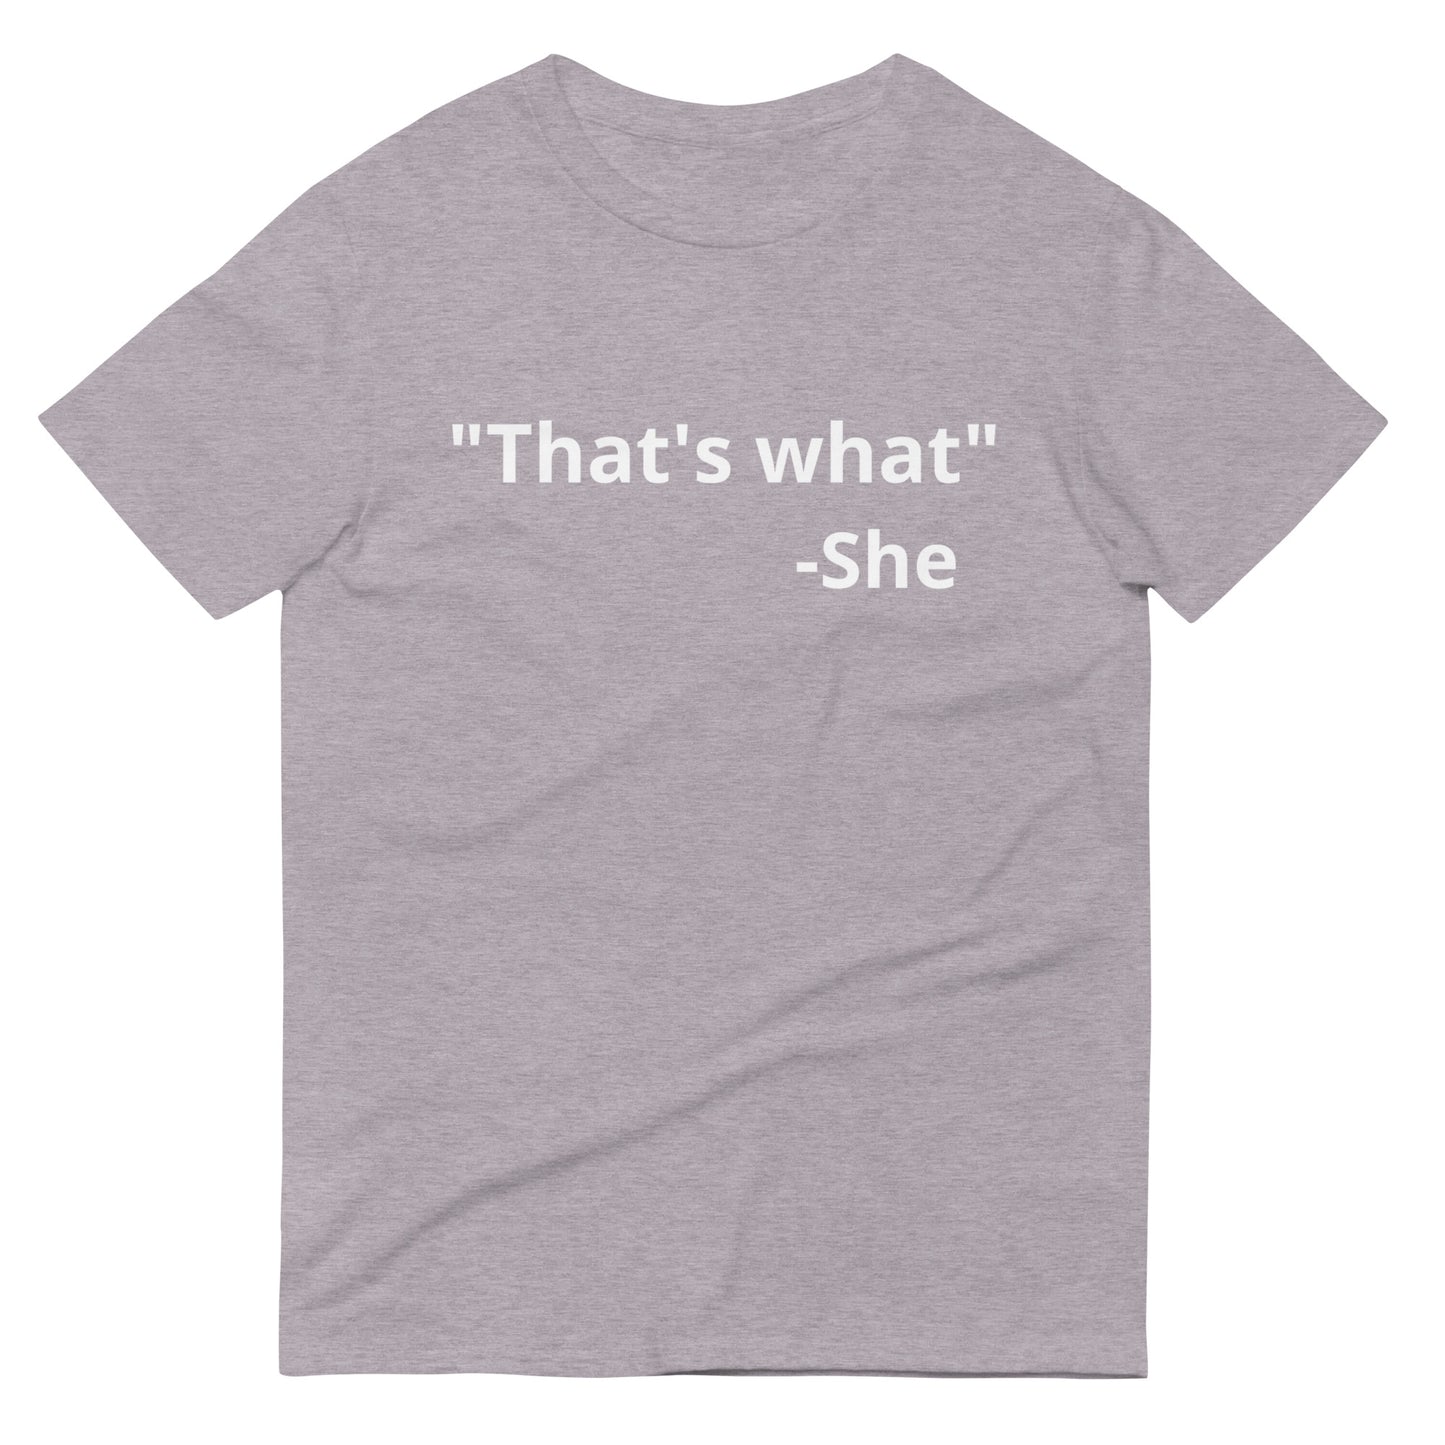 "That's what" T-Shirt